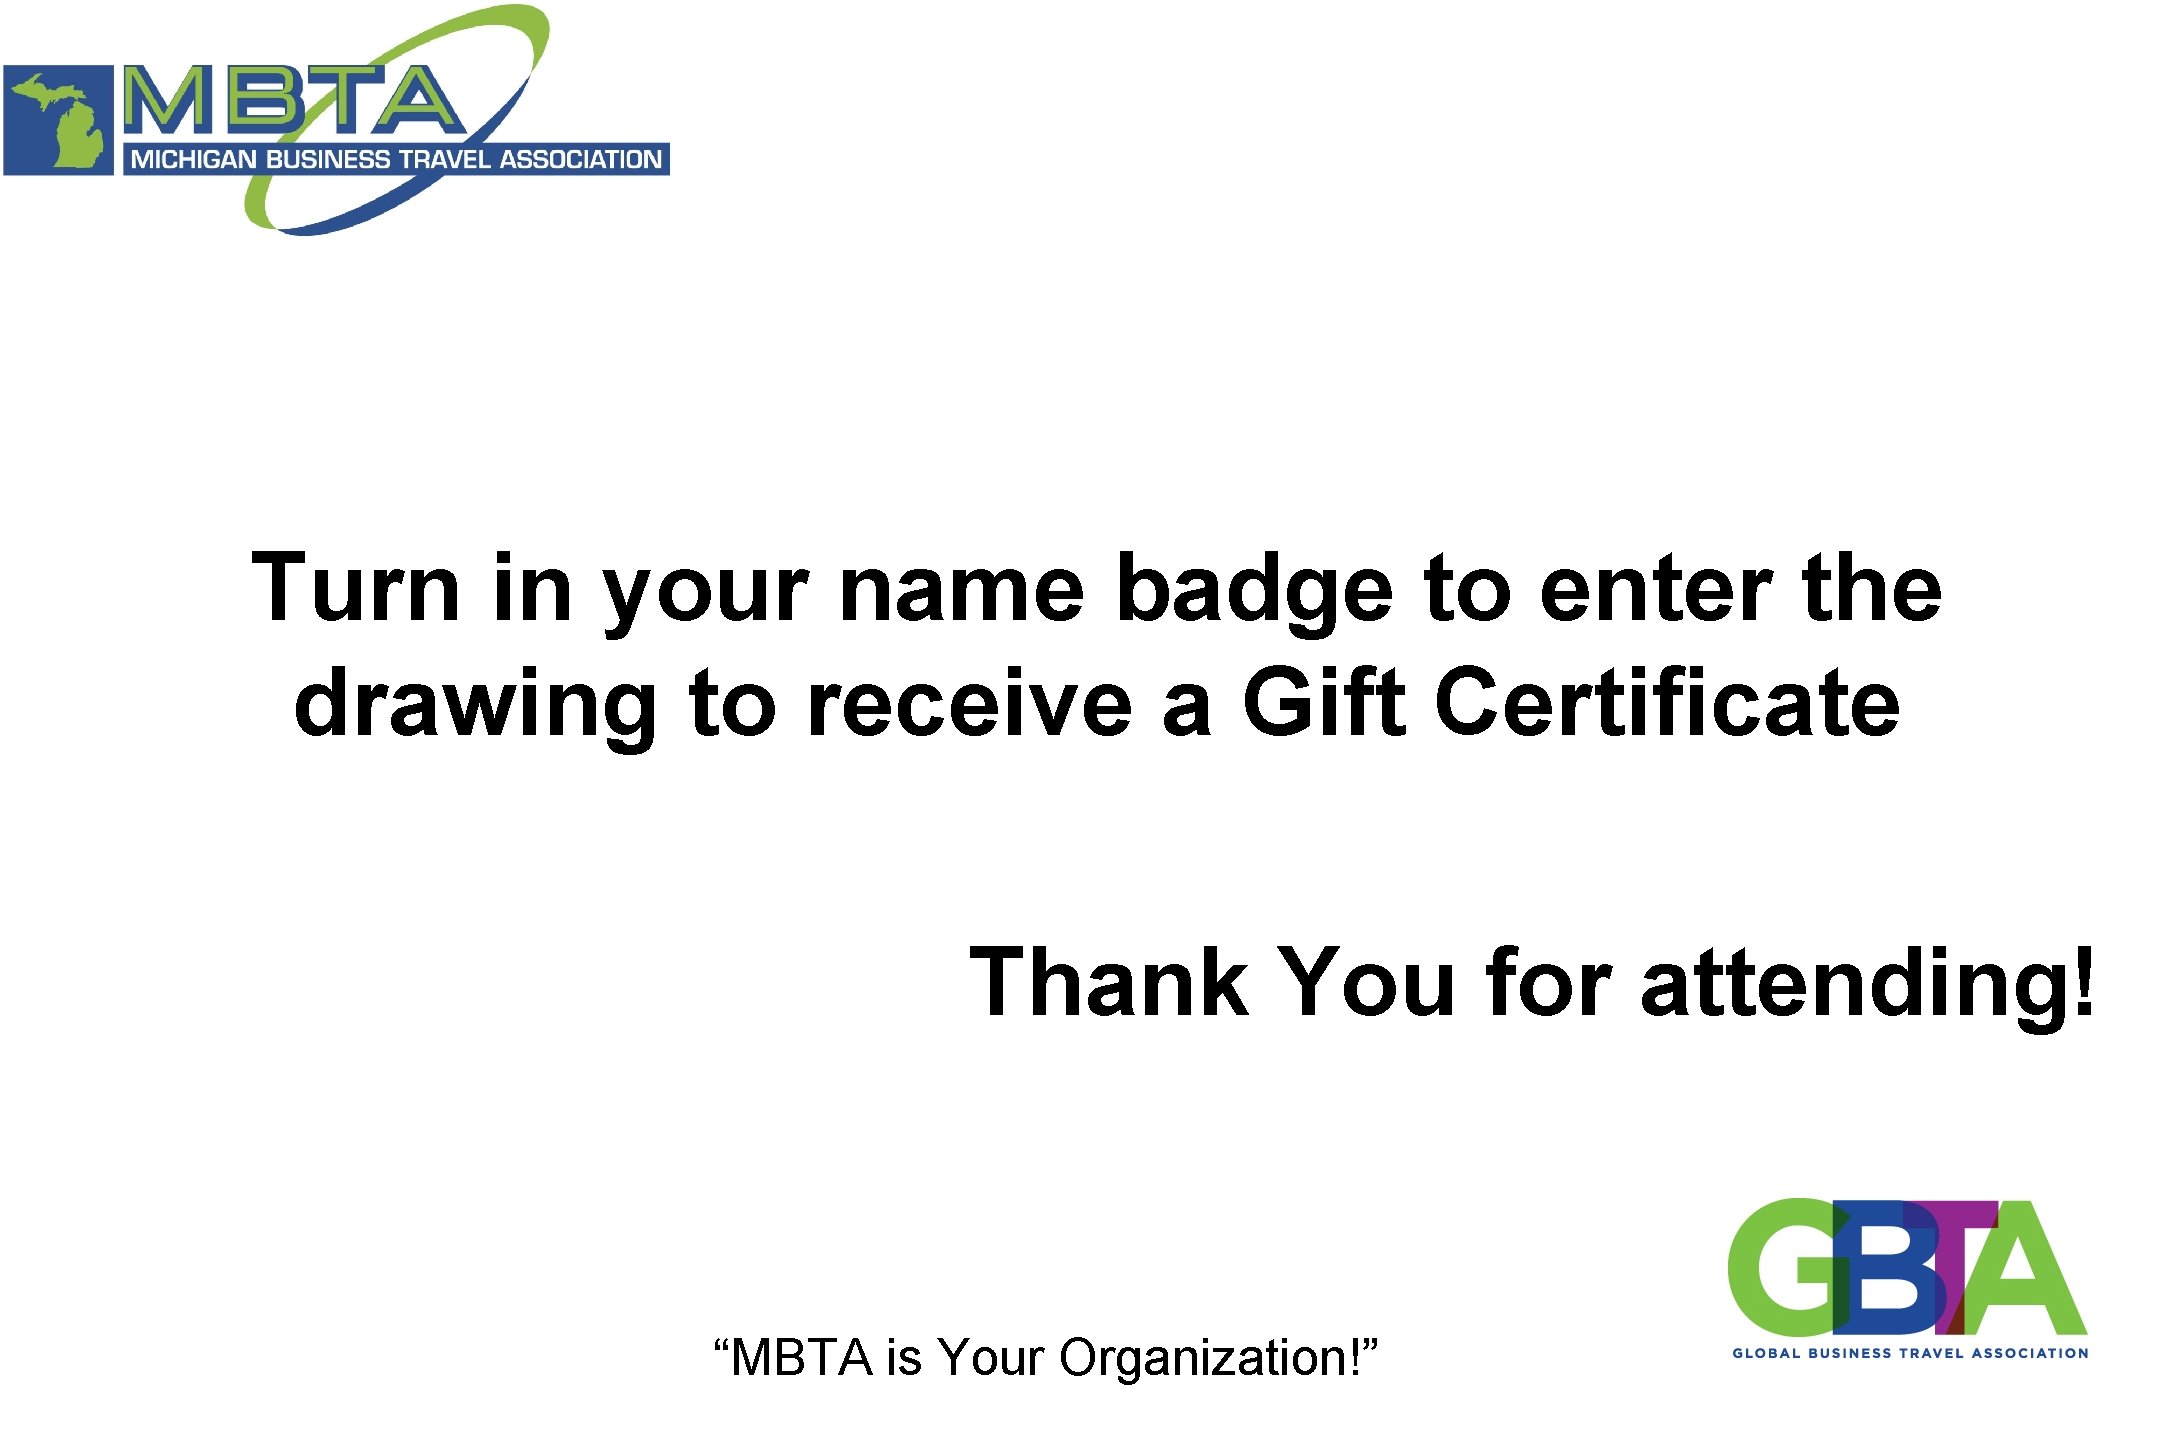 Turn in your name badge to enter the drawing to receive a Gift Certificate